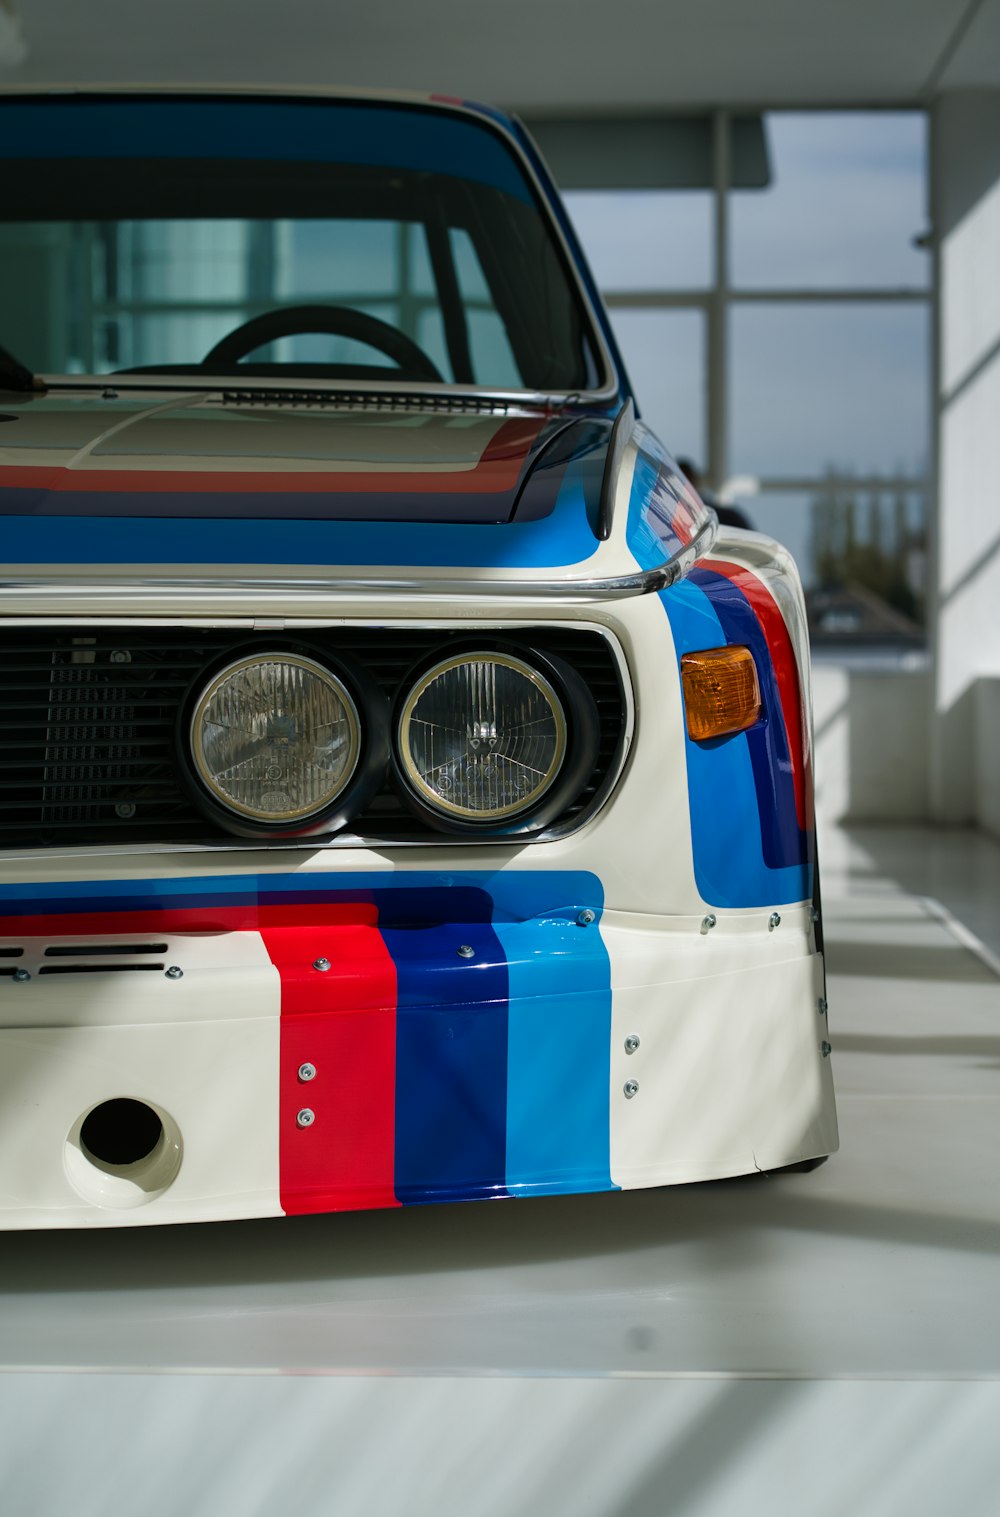 the front end of a car painted in colors of blue, red, and white